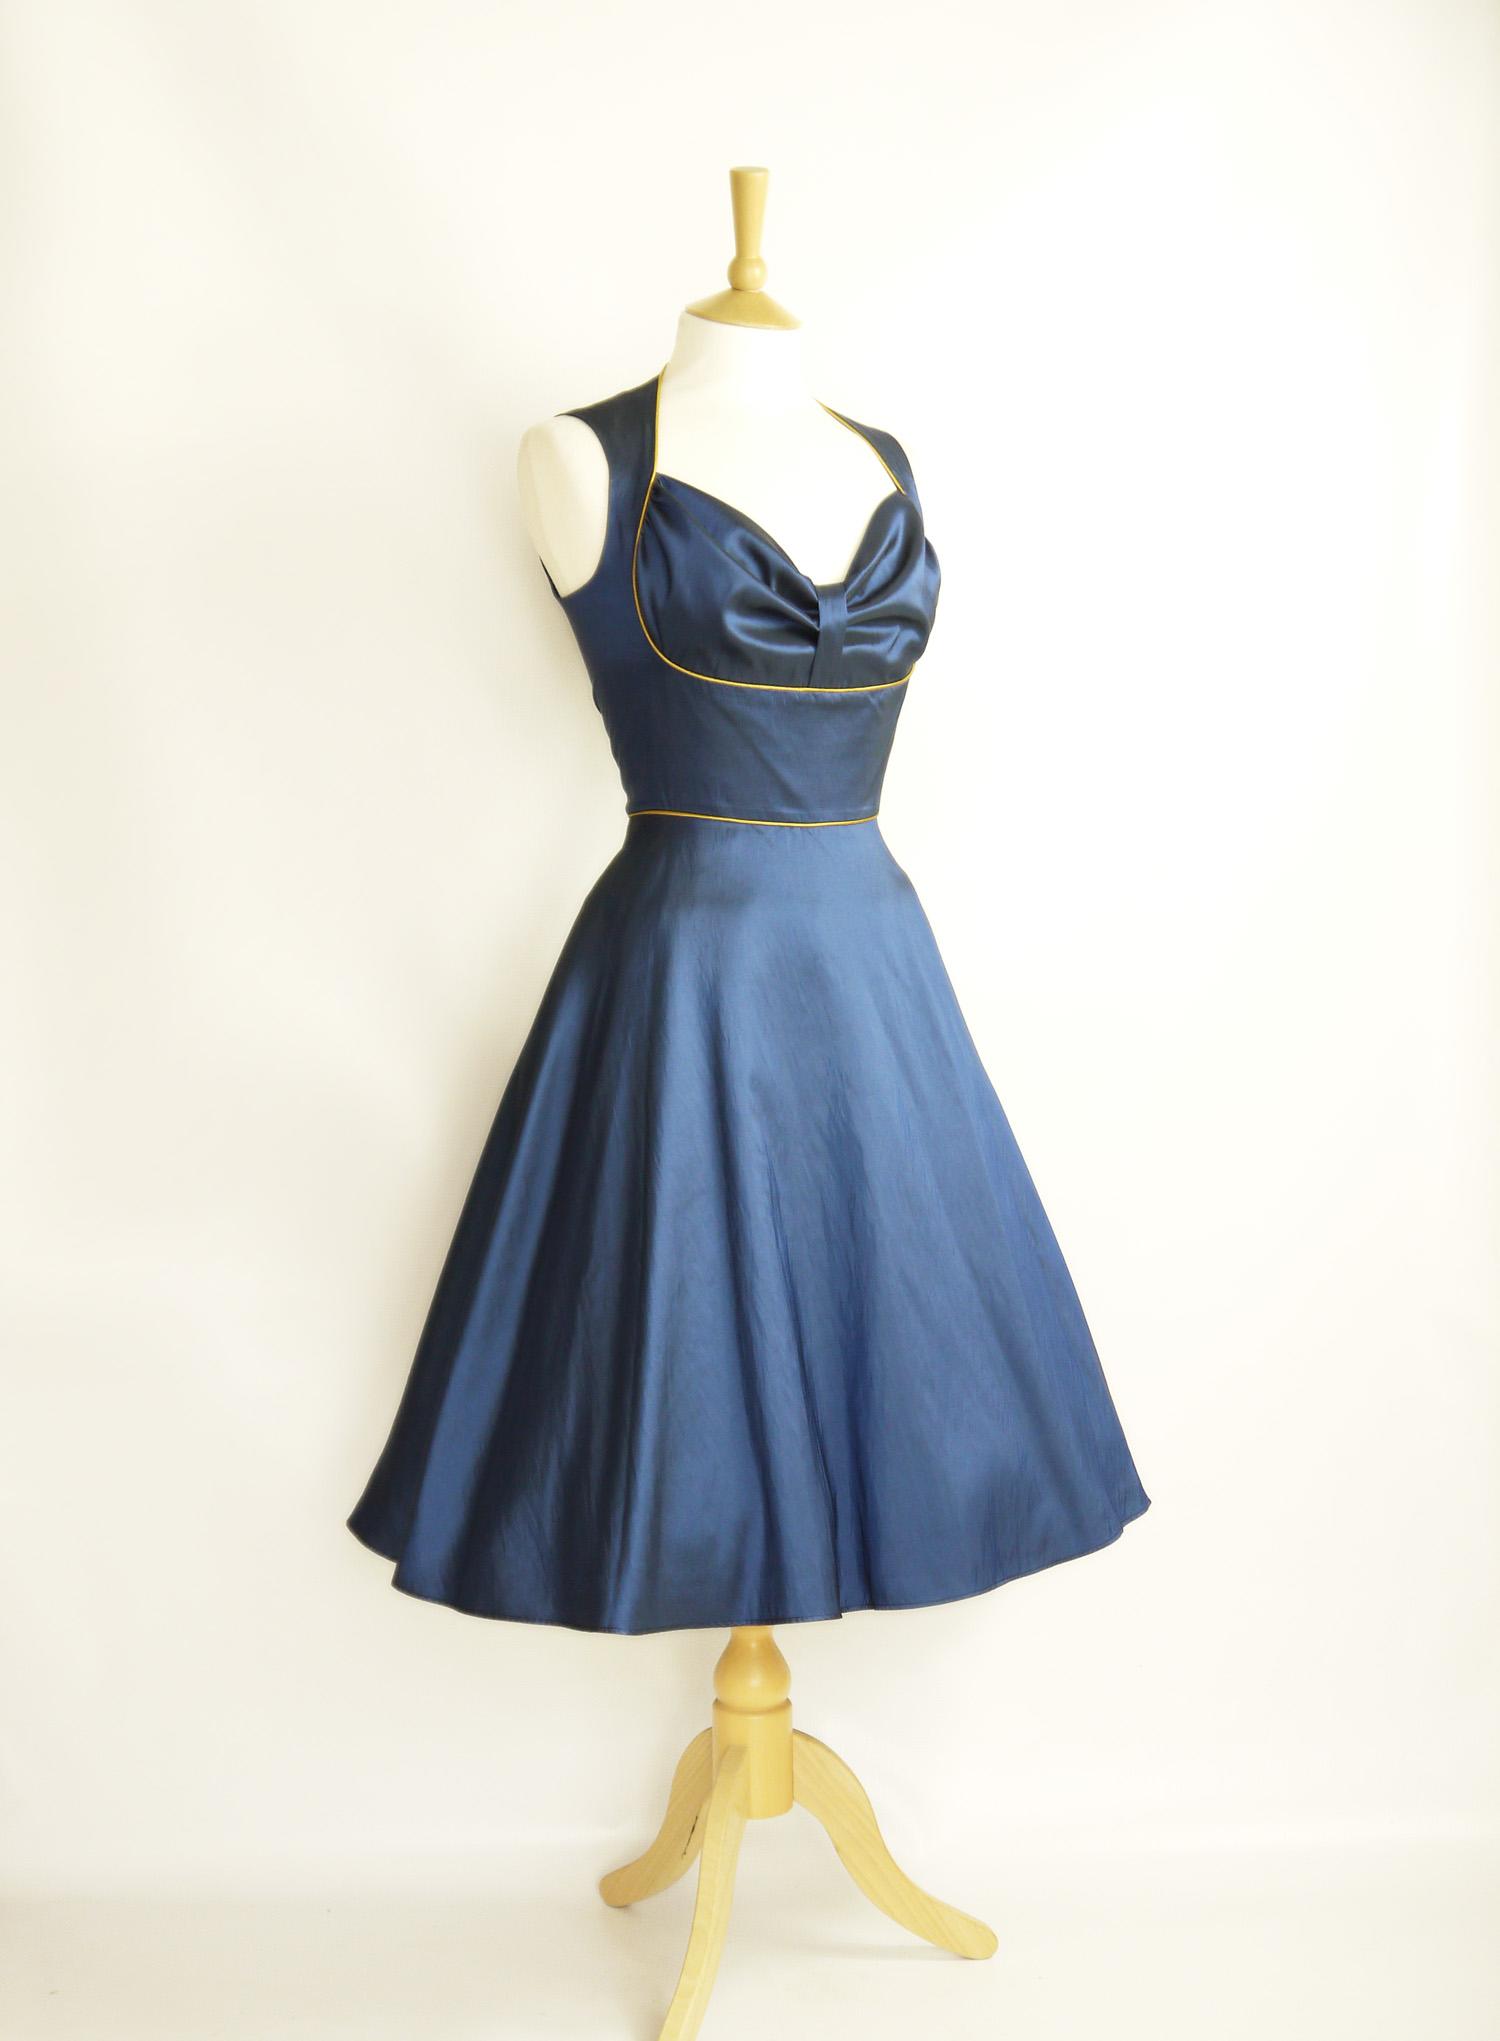 Size UK 14 - Midnight Blue Taffeta Bustier Dress with Gold Piping